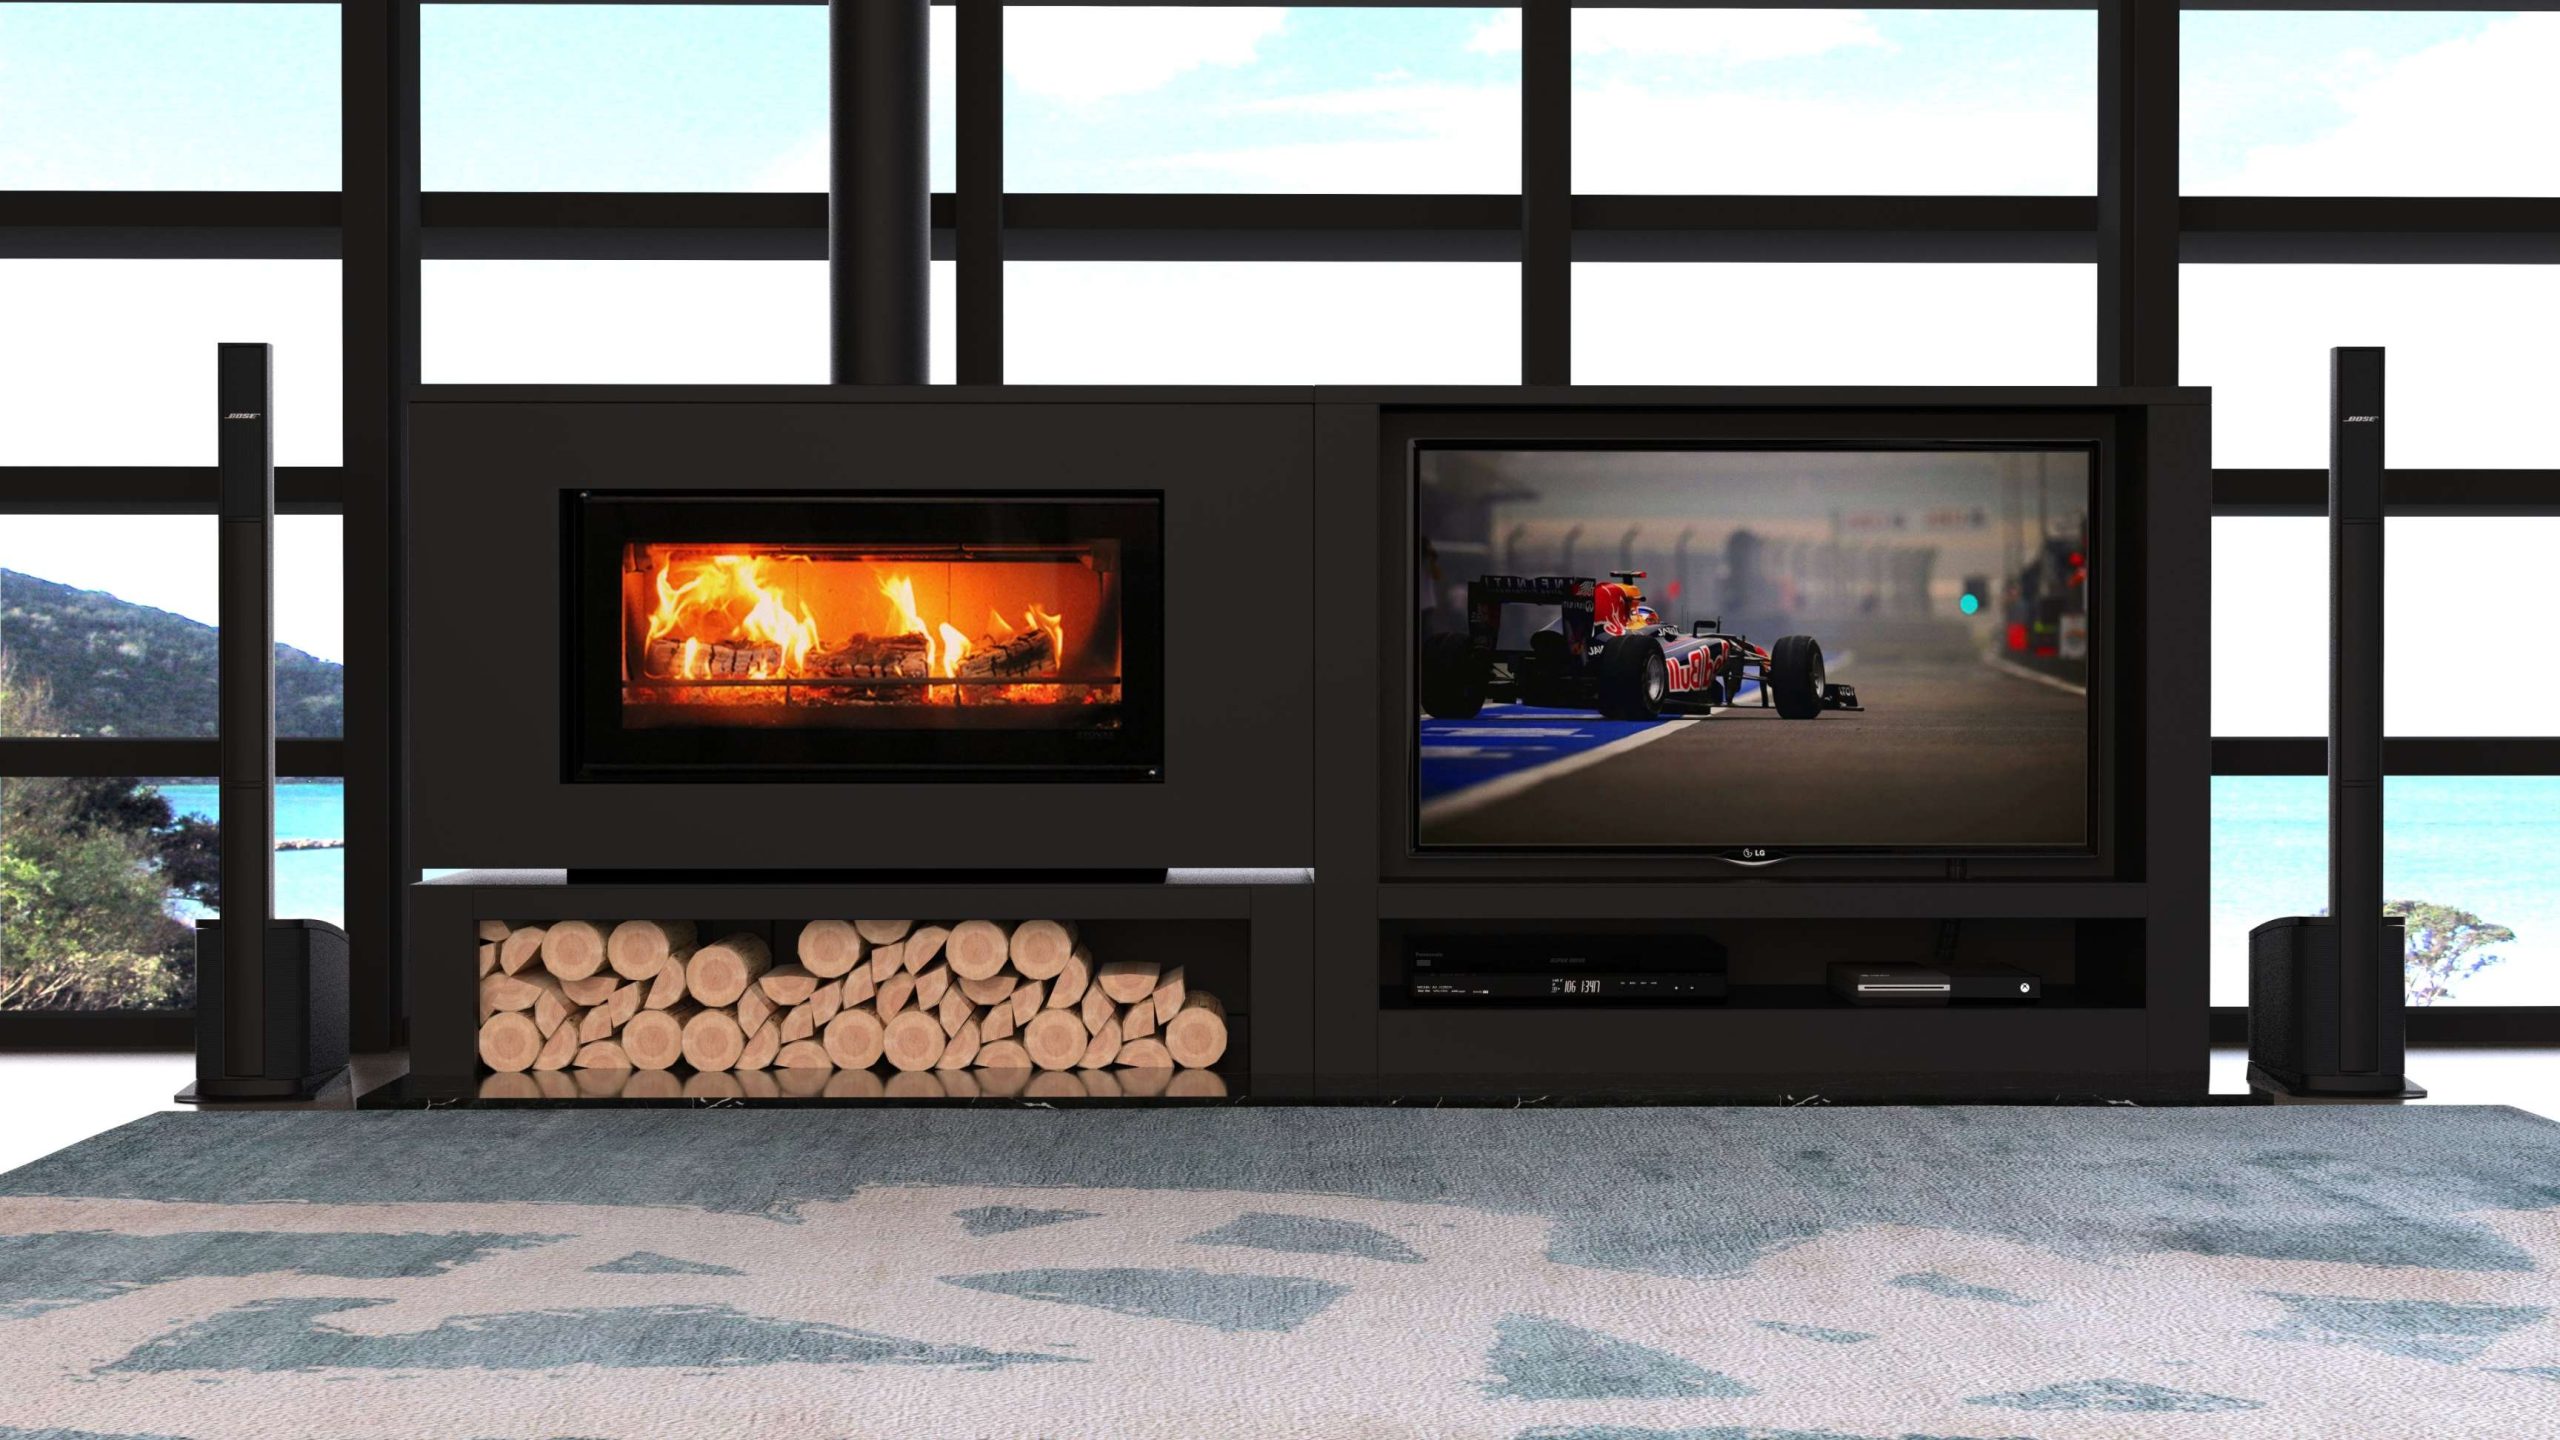 The Fireplace Introduces New Side by Side TV and Fireplace Cabinet